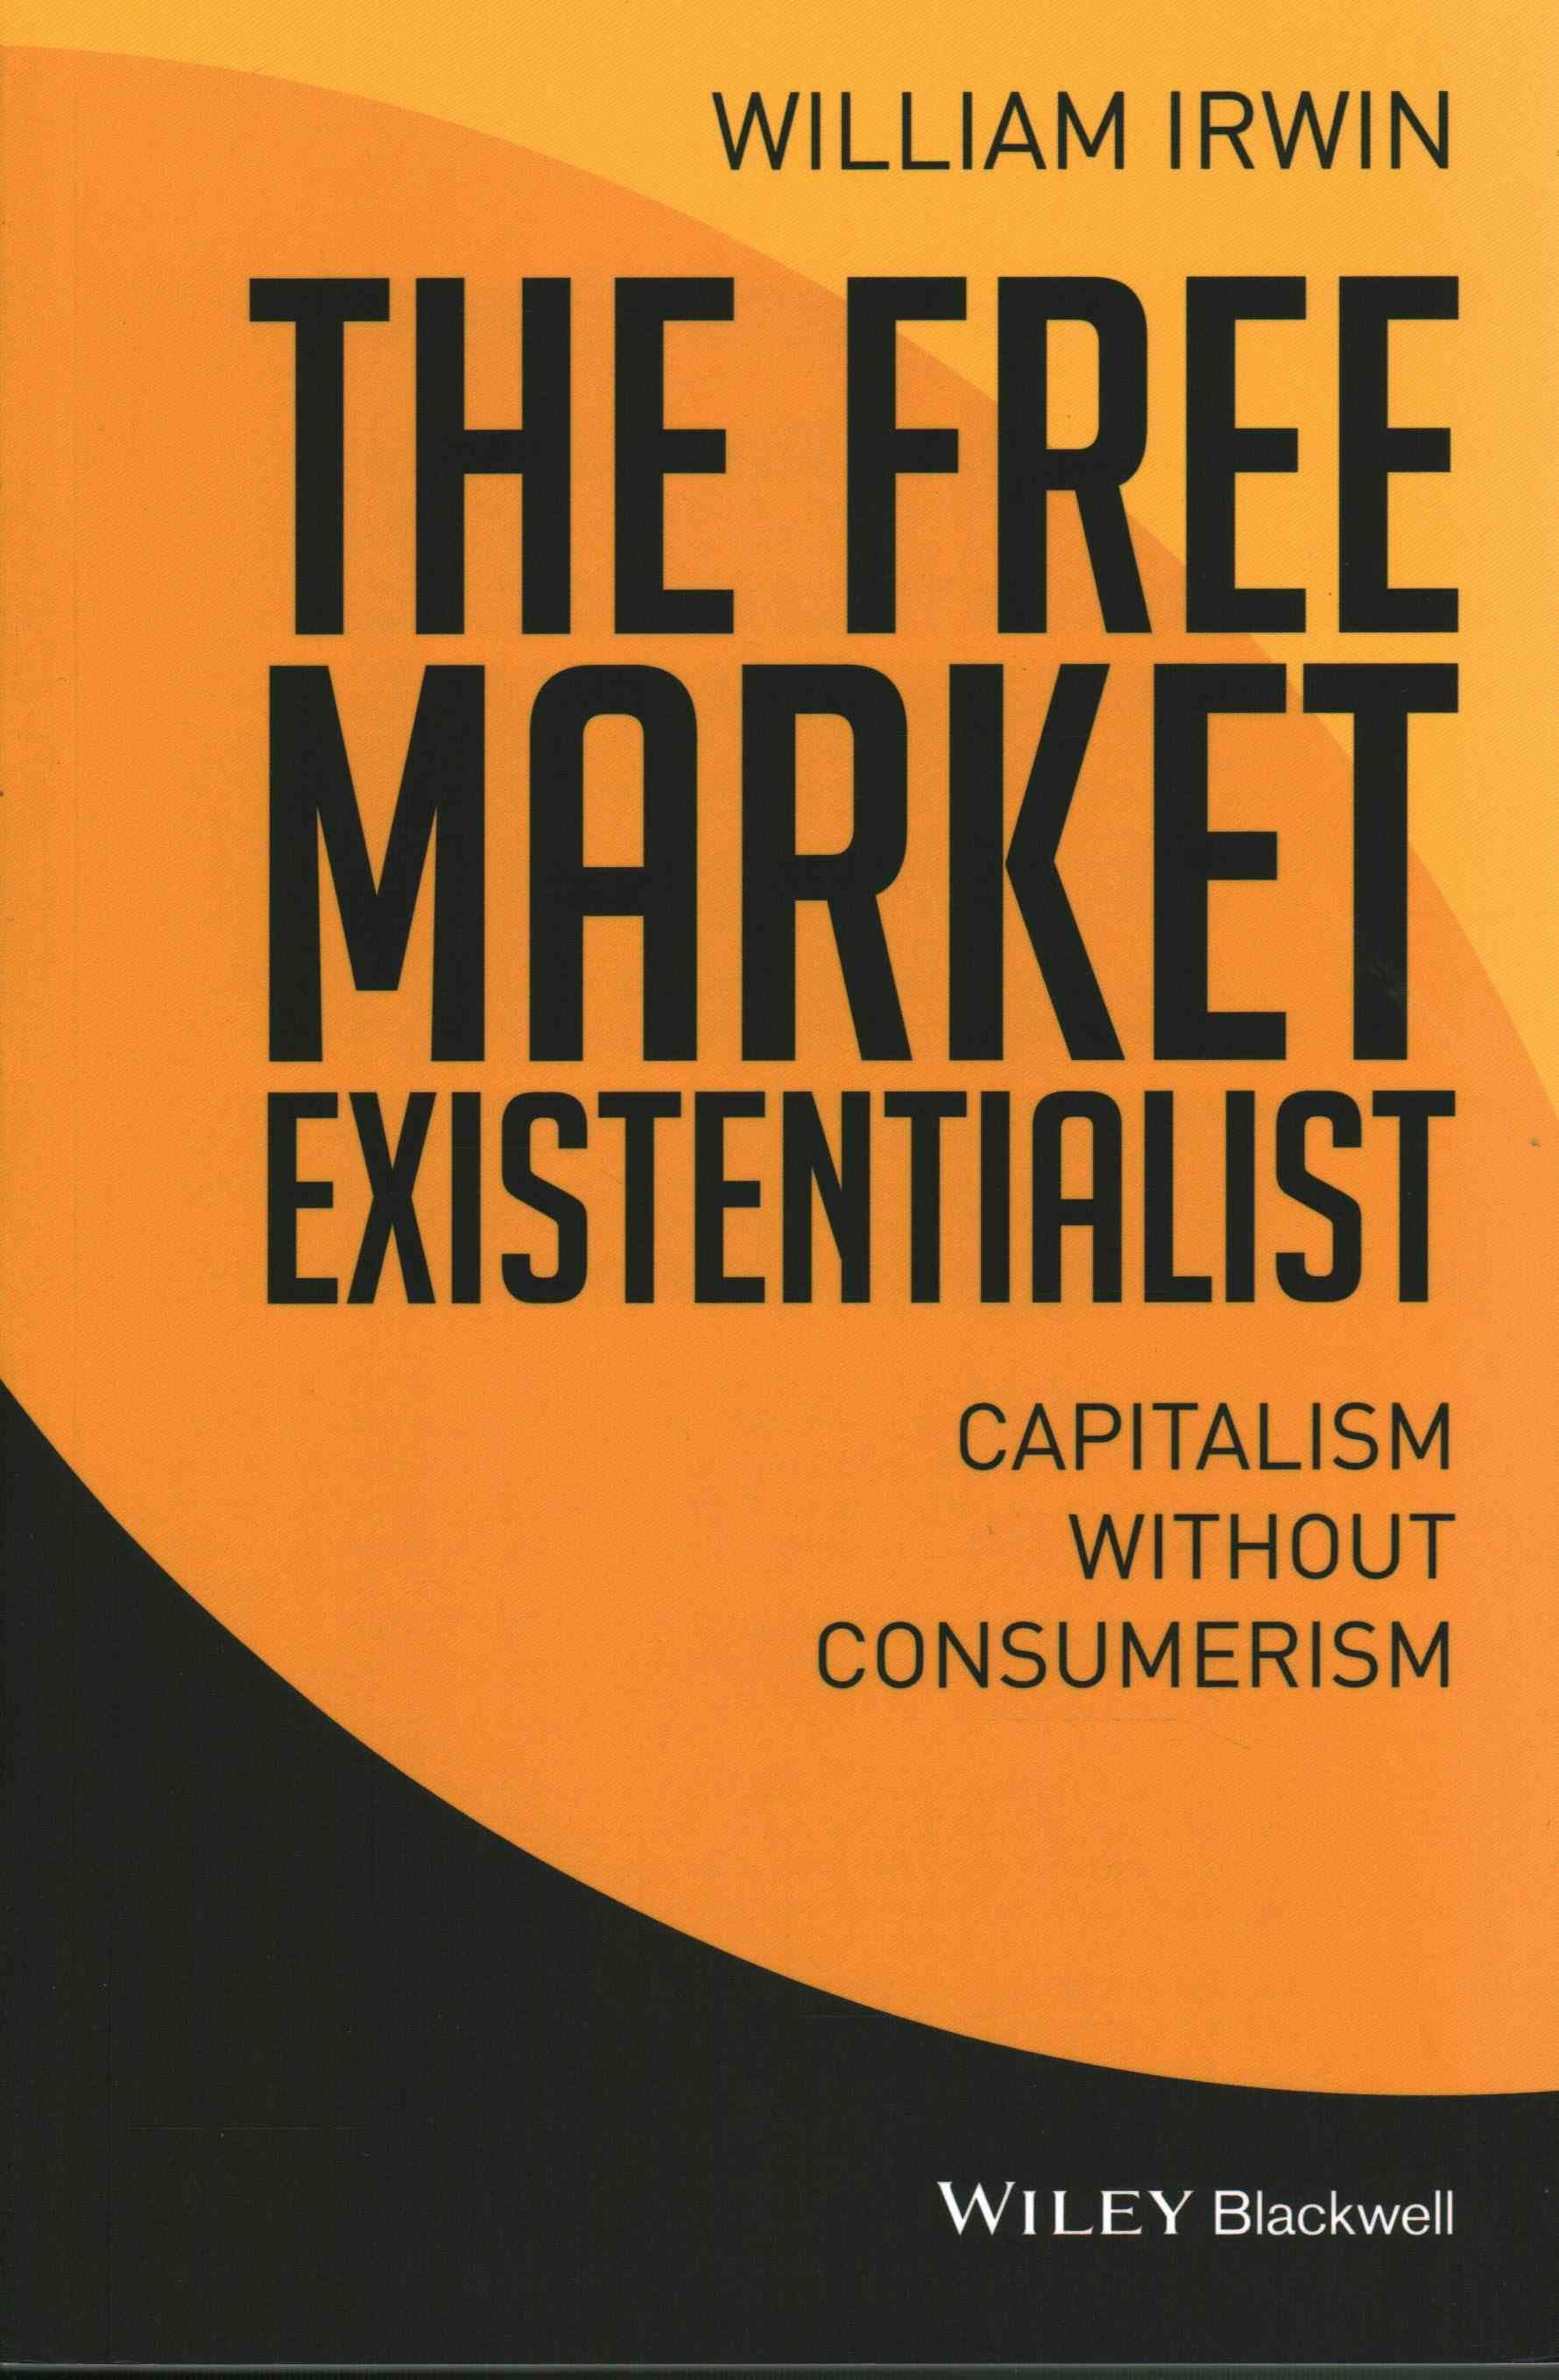 The Free Market Existentialist - Capitalism without Consumerism